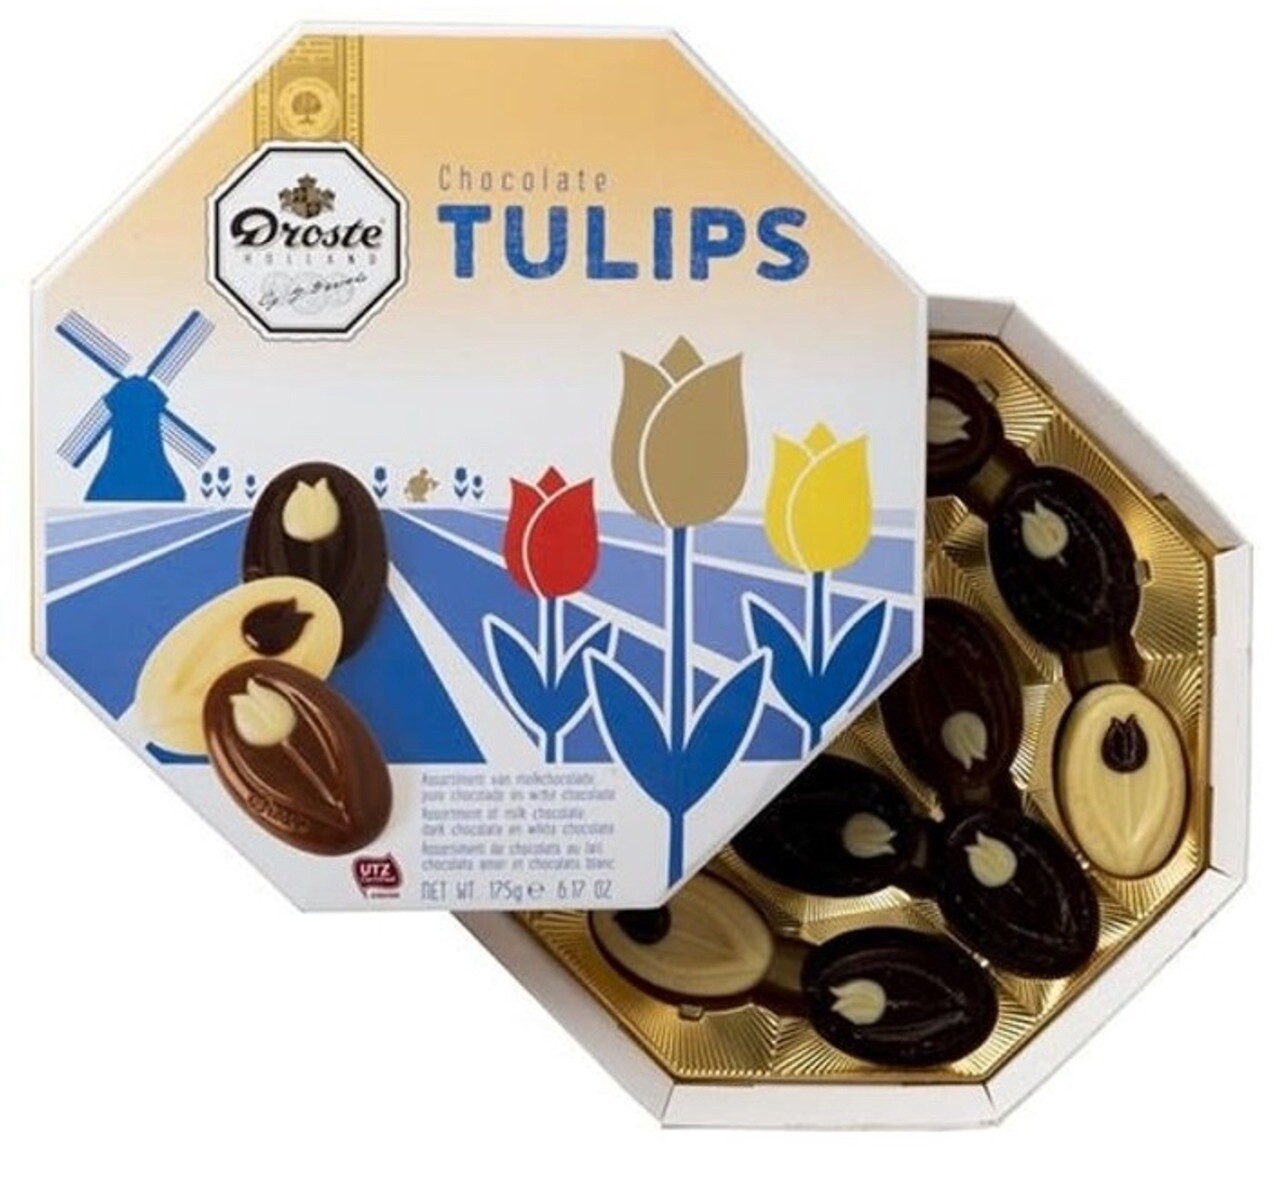 REDUCED BB - Chocolate Tulips 175g